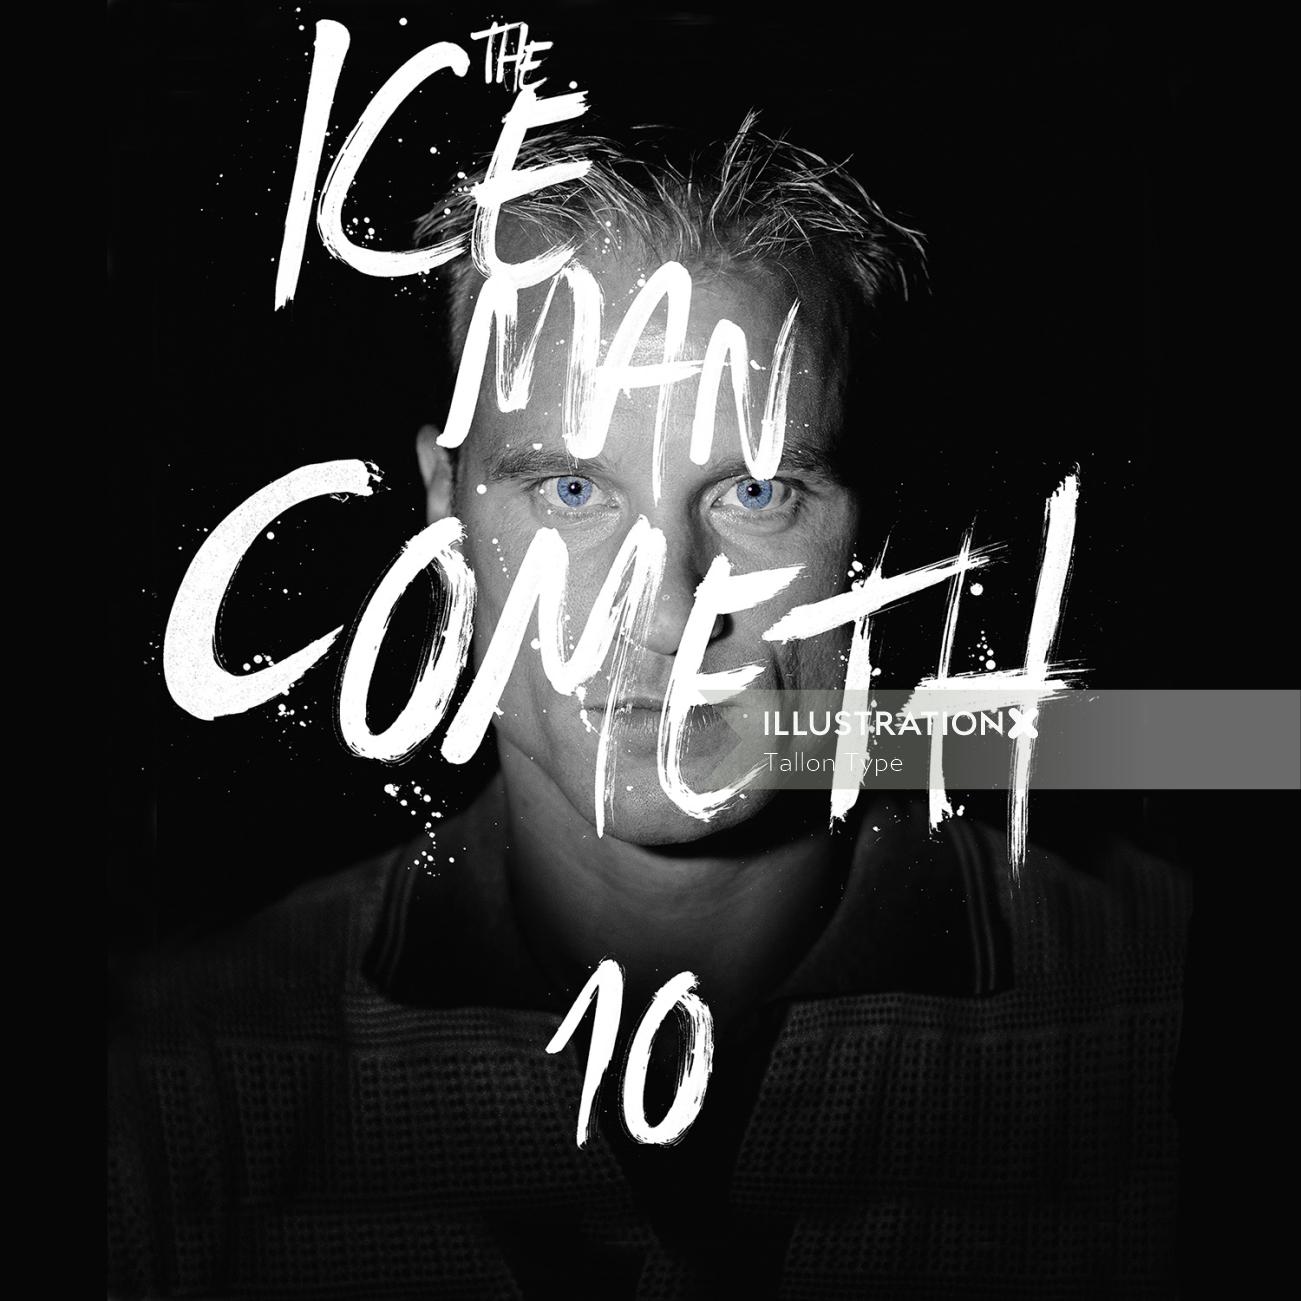 Lettering the ice man cometh
